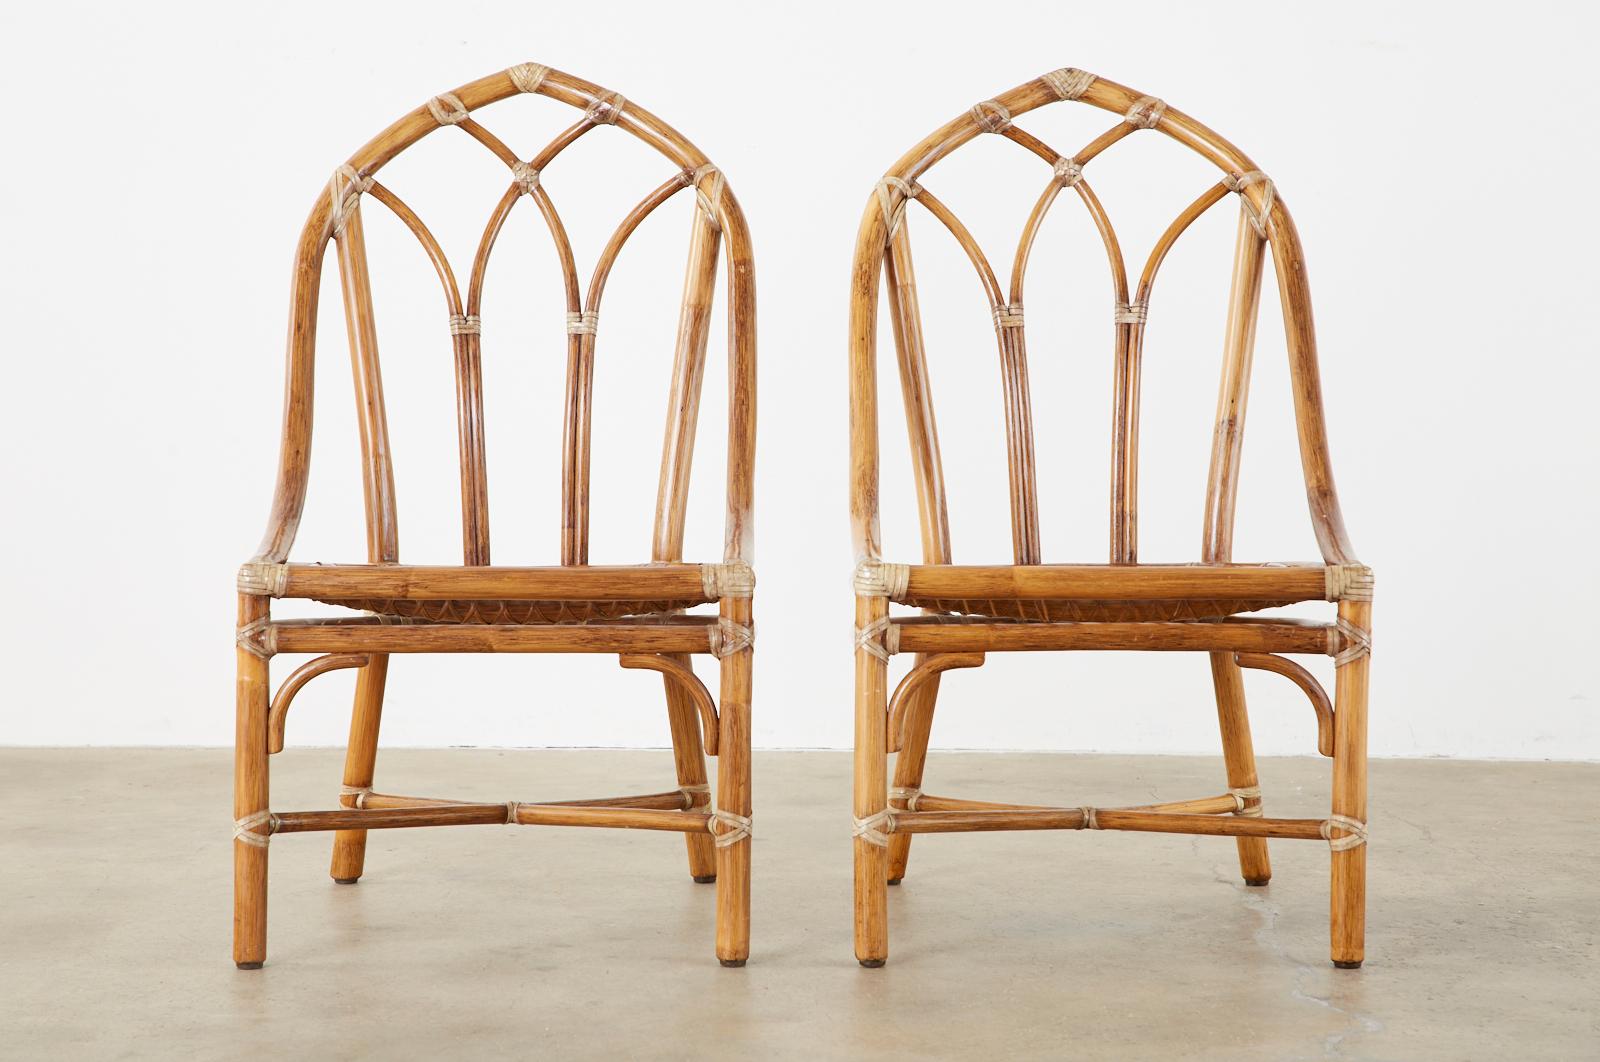 Stylish set of six genuine McGuire bamboo rattan dining chairs made in the California organic modern style. Set consists of two armchairs and four side chairs. Constructed from rattan poles lashed together with leather rawhide laces. The backs have